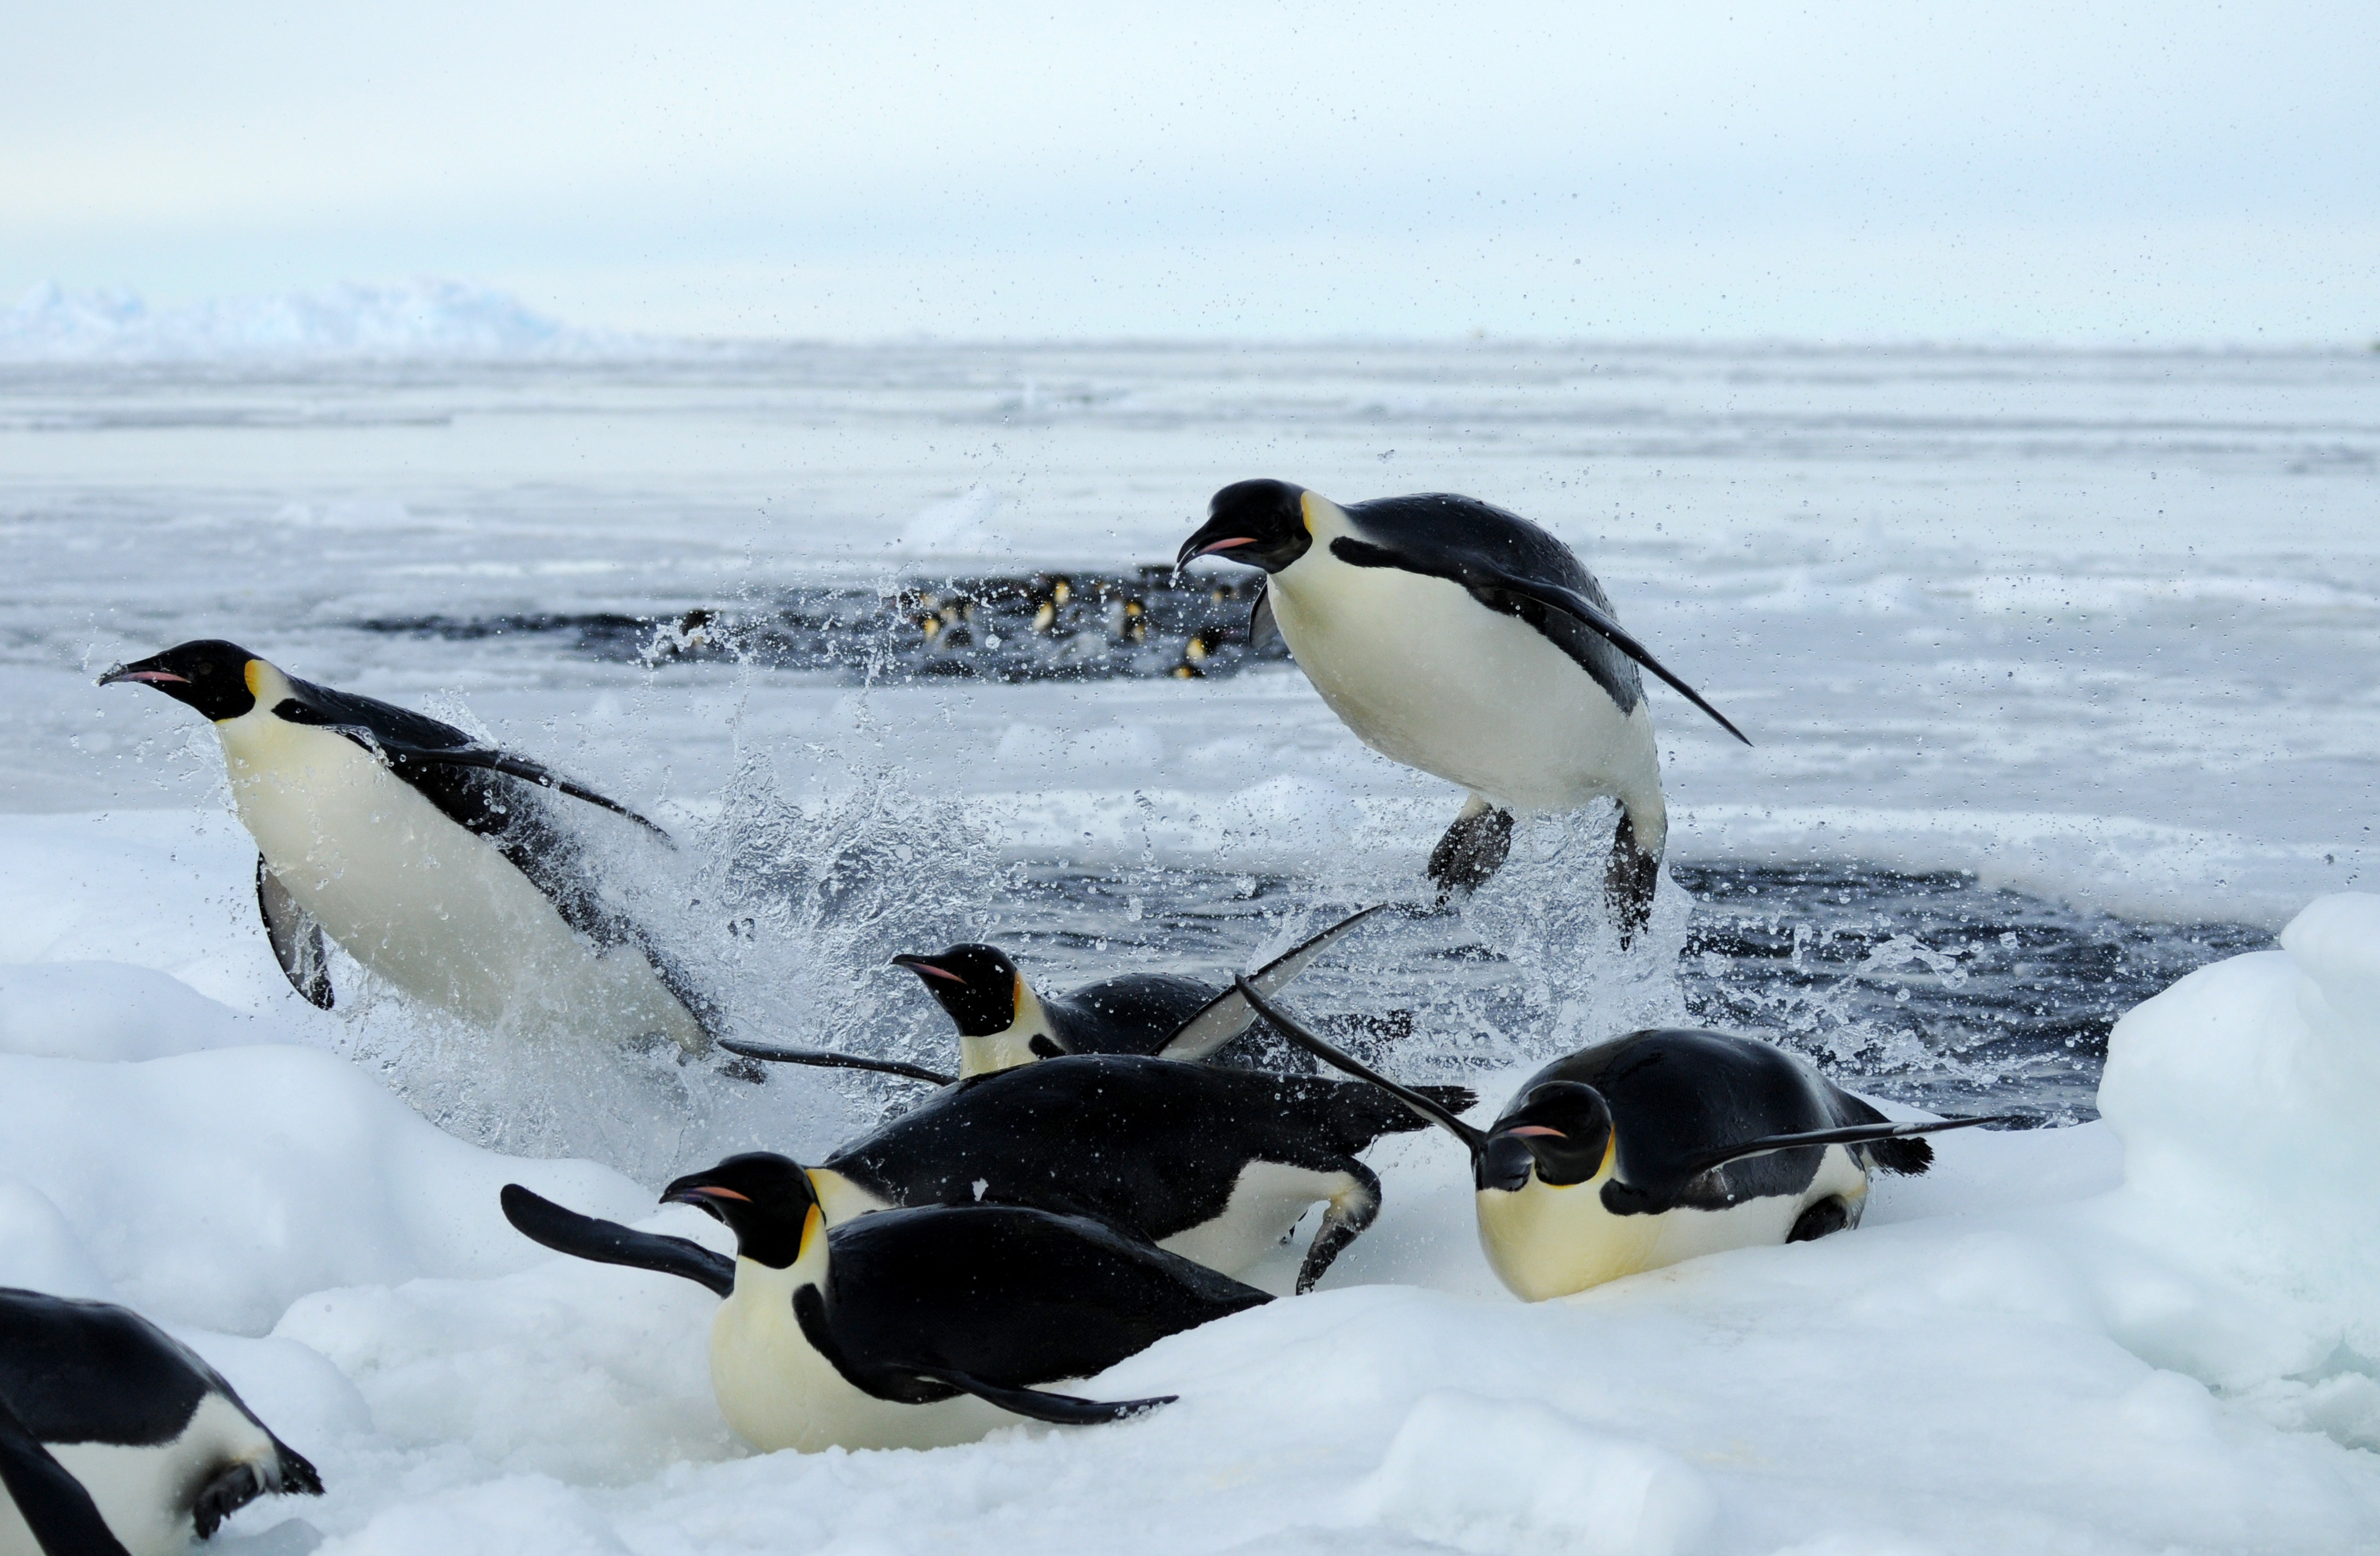 Emperor penguins leaping out of icy water.